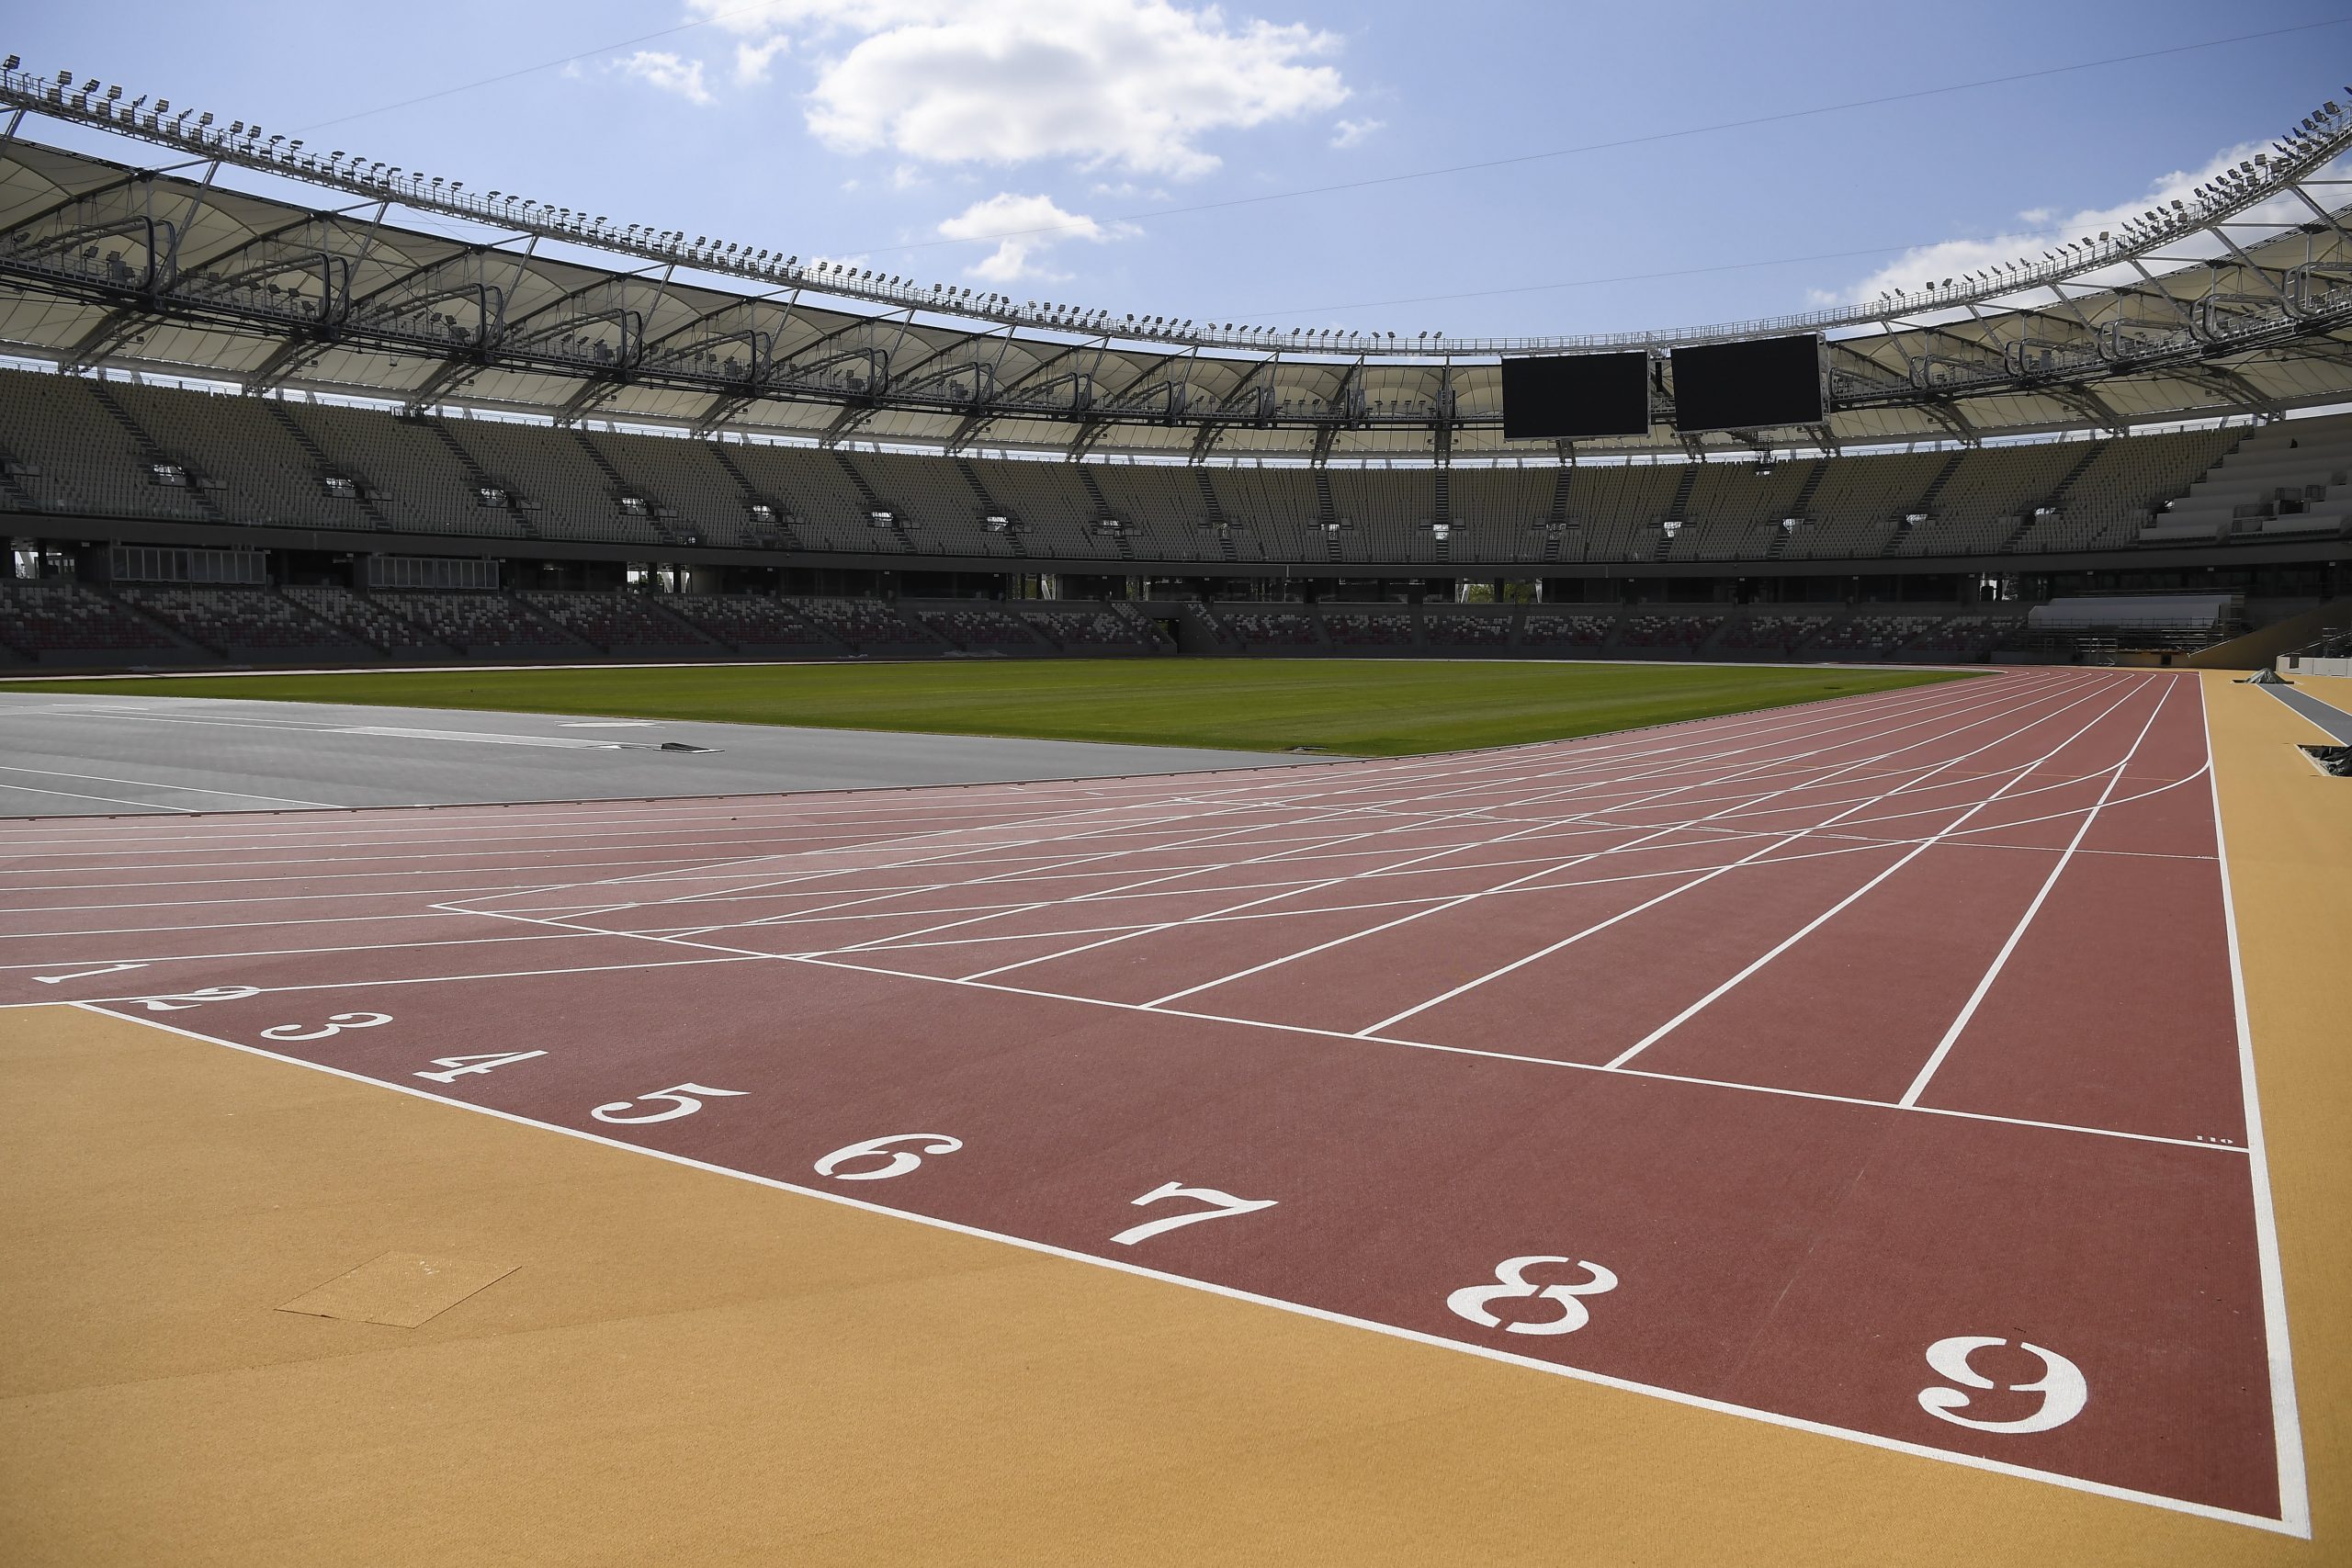 Preparations for the World Athletics Championships Reach Much Anticipated Landmark